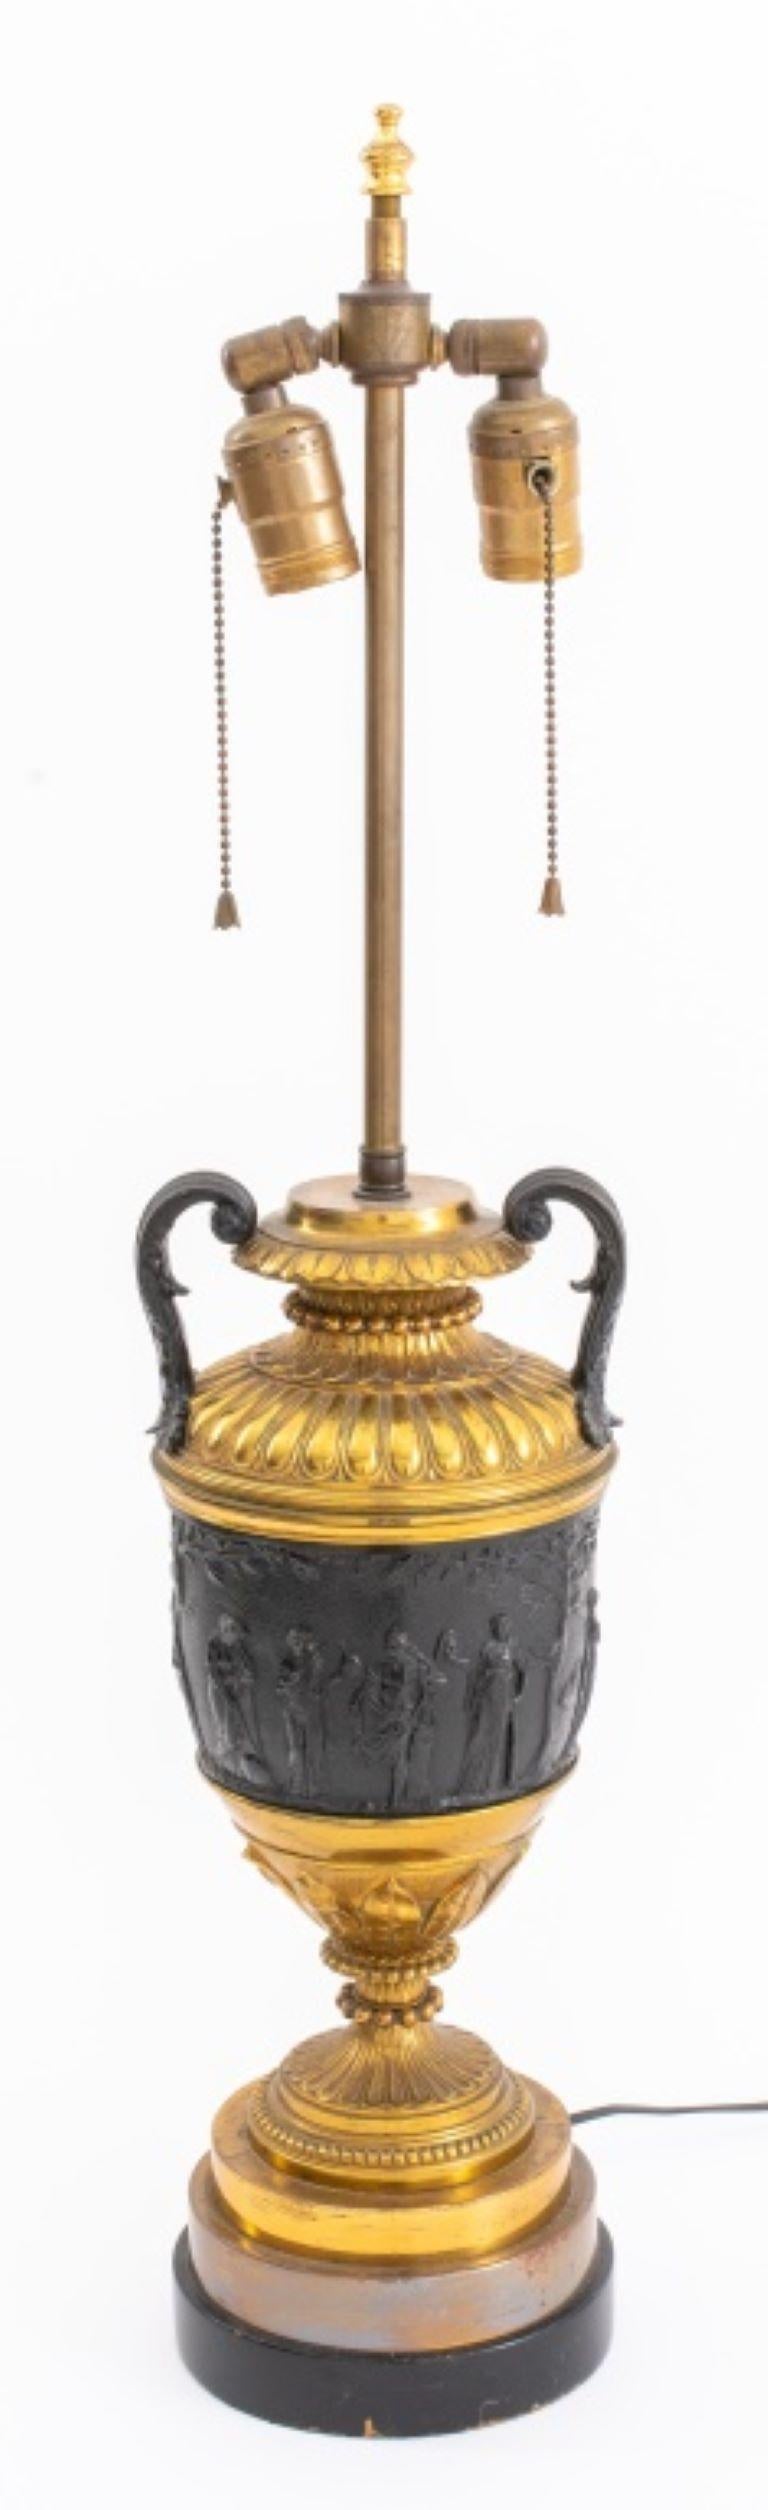 Napoleon III style neoclassical manner urn mounted as a lamp, after Louis XVI models, the gilt brass gadrooned top above a frieze depicting Bacchic scenes on a leaf-tip cast socle above a round base.